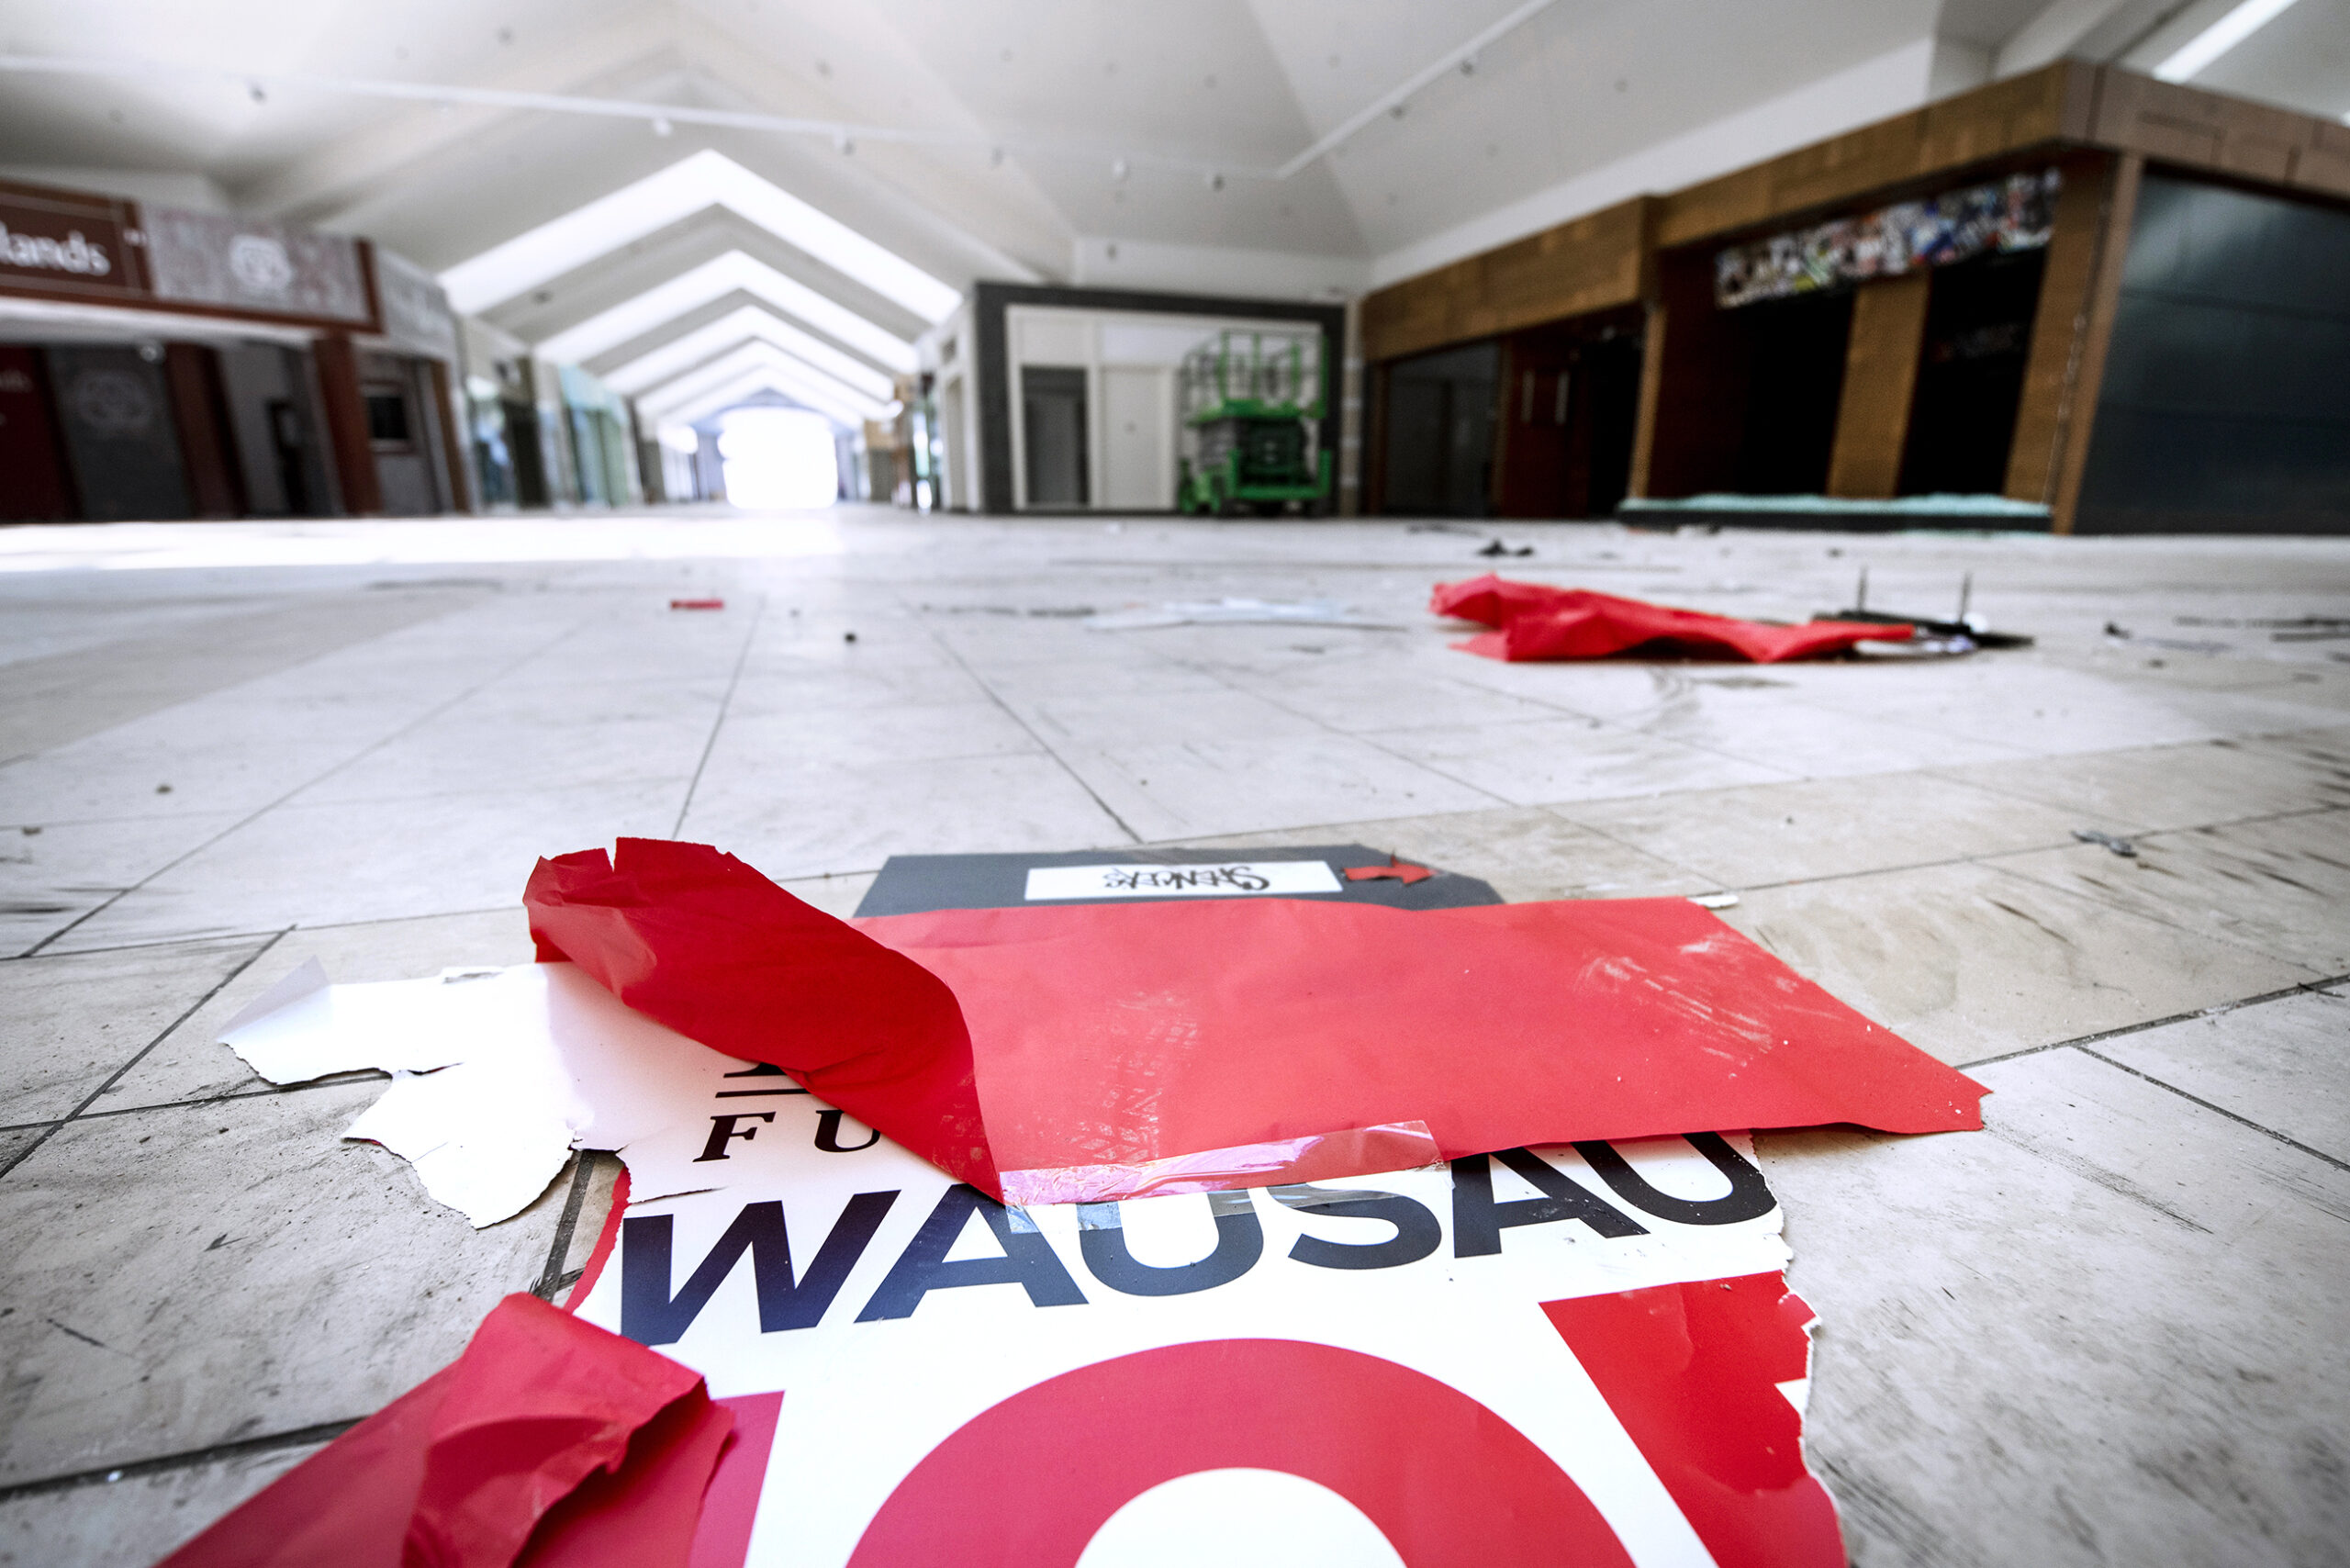 Wausau Demolished Its Mall. Could What Comes Next Be A New Model For Small-City Downtowns?